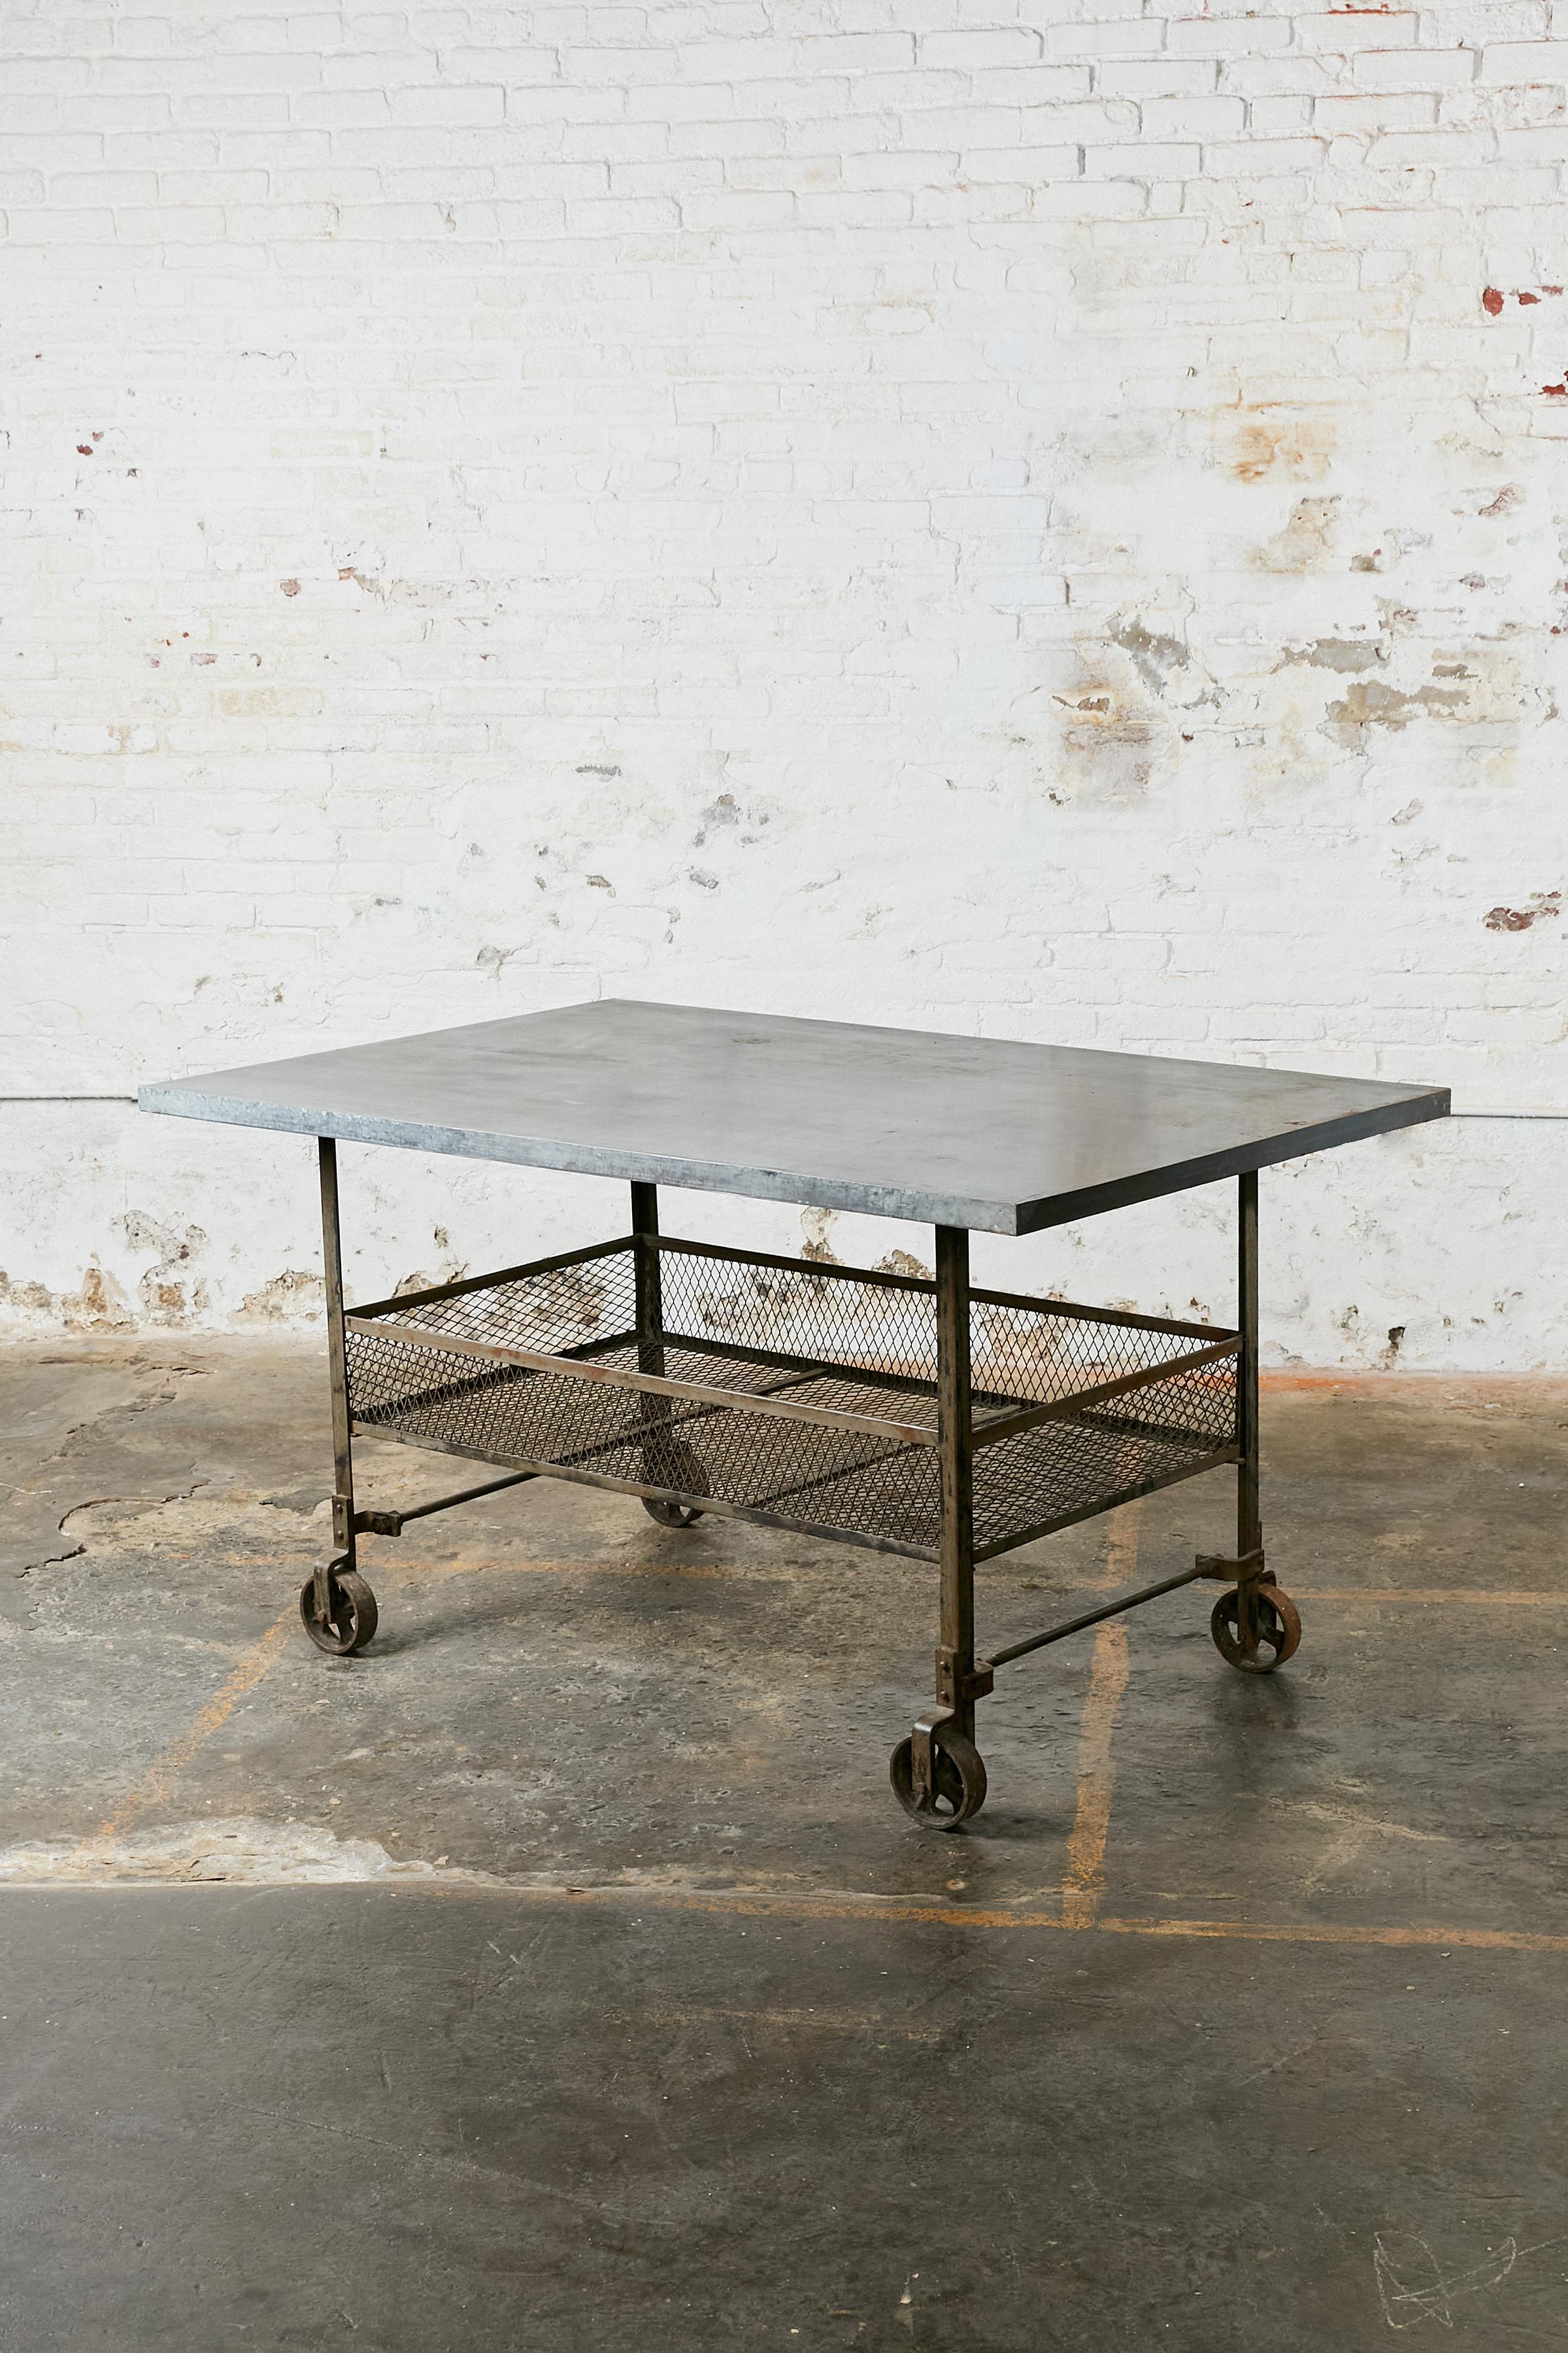 Rolling industrial table. Top covered in zinc and shelf/basket made of wire. All four legs rest on pivot wheels.